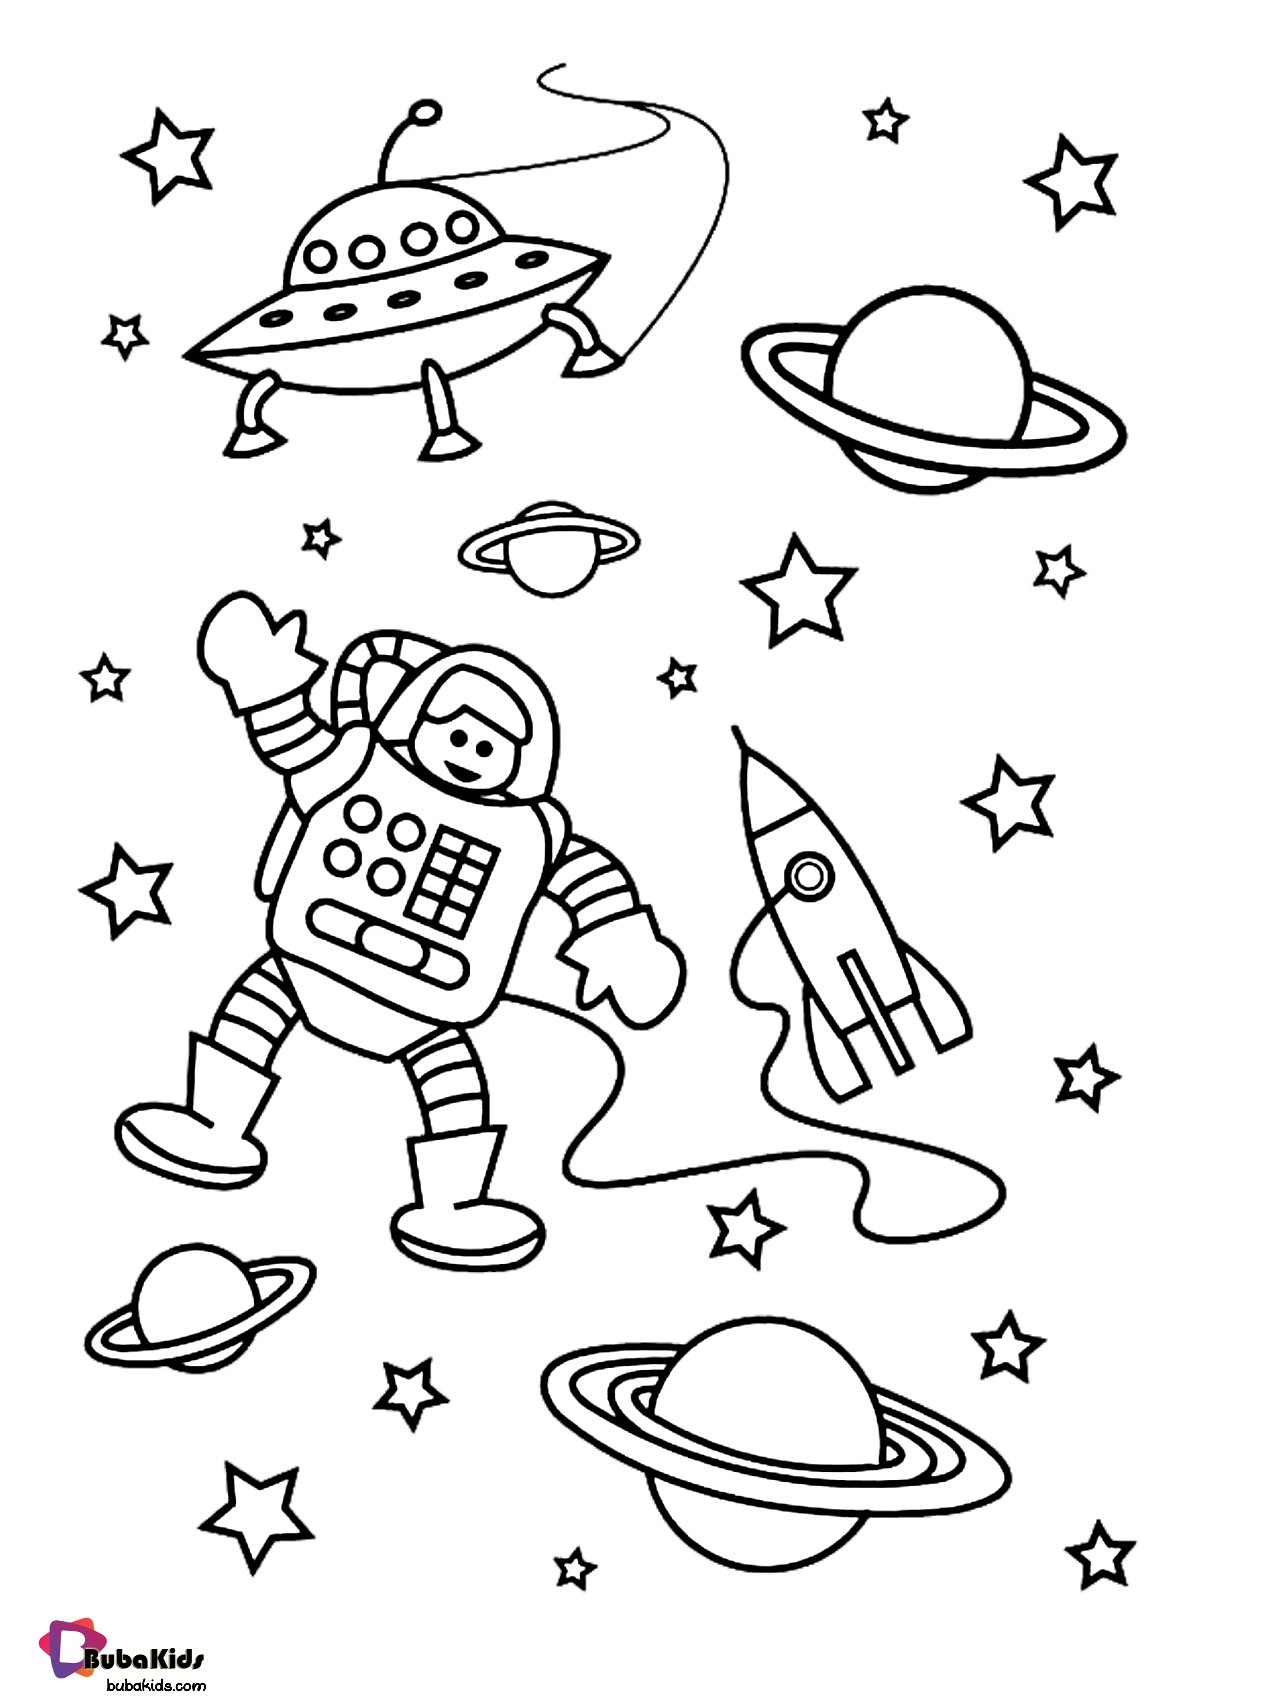 38 Printable Outer Space Coloring Pages Free Coloring Pages For All Ages